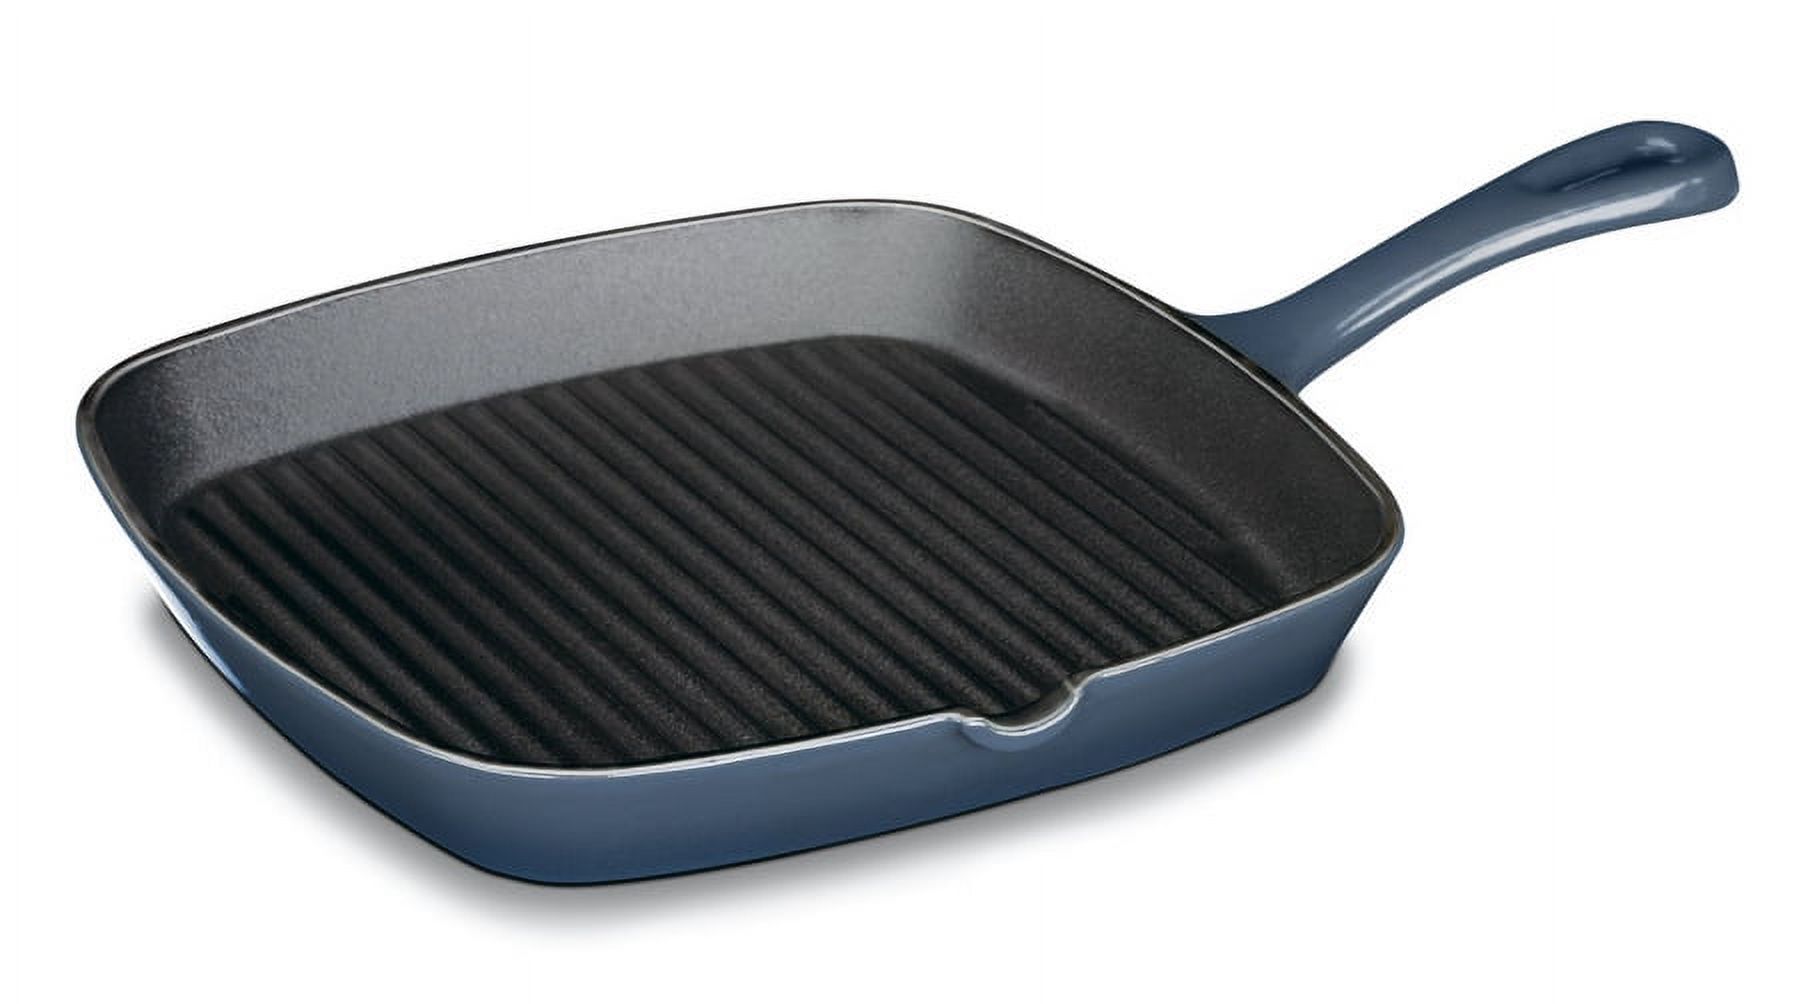 Cuisinart Chef'S Classic Enameled Cast Iron 9.25" Square Grill Pan-Provencal Blue - image 1 of 3